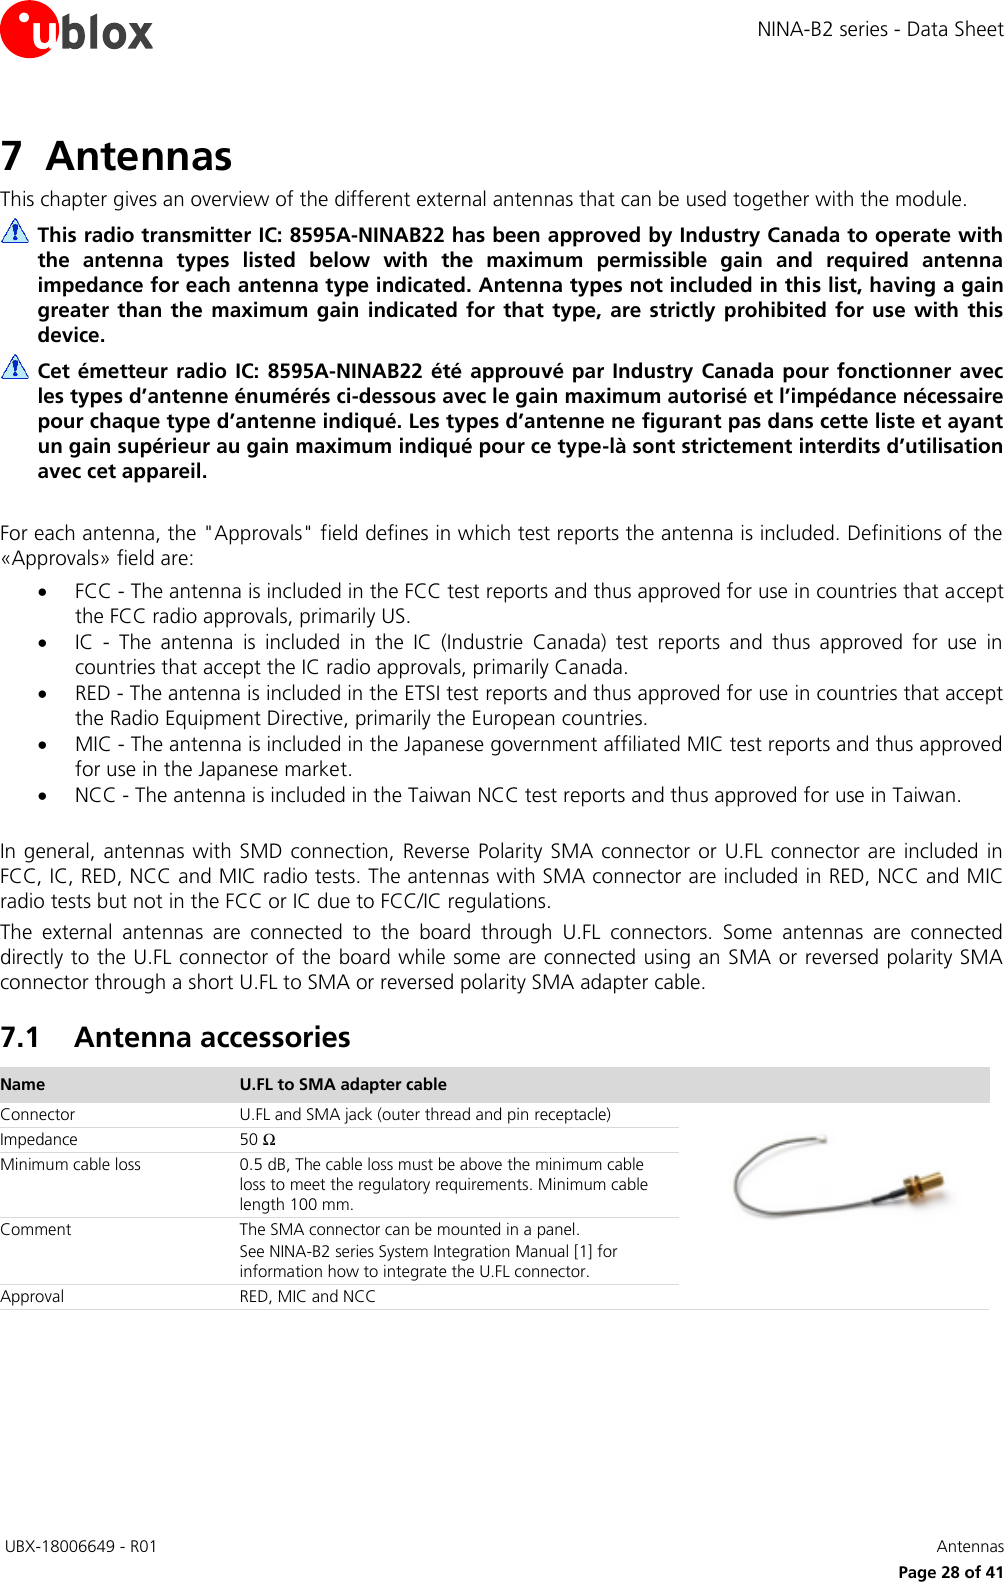 NINA-B2 series - Data Sheet  UBX-18006649 - R01   Antennas     Page 28 of 41 7 Antennas This chapter gives an overview of the different external antennas that can be used together with the module.  This radio transmitter IC: 8595A-NINAB22 has been approved by Industry Canada to operate with the  antenna  types  listed  below  with  the  maximum  permissible  gain  and  required  antenna impedance for each antenna type indicated. Antenna types not included in this list, having a gain greater  than the maximum  gain  indicated  for  that  type,  are  strictly  prohibited  for use  with  this device.  Cet émetteur radio IC: 8595A-NINAB22 été approuvé par  Industry  Canada  pour fonctionner  avec les types d’antenne énumérés ci-dessous avec le gain maximum autorisé et l’impédance nécessaire pour chaque type d’antenne indiqué. Les types d’antenne ne figurant pas dans cette liste et ayant un gain supérieur au gain maximum indiqué pour ce type-là sont strictement interdits d’utilisation avec cet appareil.  For each antenna, the &quot;Approvals&quot; field defines in which test reports the antenna is included. Definitions of the «Approvals» field are:  FCC - The antenna is included in the FCC test reports and thus approved for use in countries that accept the FCC radio approvals, primarily US.  IC  -  The  antenna  is  included  in  the  IC  (Industrie  Canada)  test  reports  and  thus  approved  for  use  in countries that accept the IC radio approvals, primarily Canada.  RED - The antenna is included in the ETSI test reports and thus approved for use in countries that accept the Radio Equipment Directive, primarily the European countries.  MIC - The antenna is included in the Japanese government affiliated MIC test reports and thus approved for use in the Japanese market.  NCC - The antenna is included in the Taiwan NCC test reports and thus approved for use in Taiwan.  In general,  antennas with SMD connection, Reverse Polarity  SMA connector or  U.FL connector are included  in FCC, IC, RED, NCC and MIC radio tests. The antennas with SMA connector are included in RED, NCC and MIC radio tests but not in the FCC or IC due to FCC/IC regulations.  The  external  antennas  are  connected  to  the  board  through  U.FL  connectors.  Some  antennas  are  connected directly to the U.FL connector of the board while some are connected using an SMA or reversed polarity SMA connector through a short U.FL to SMA or reversed polarity SMA adapter cable. 7.1 Antenna accessories Name U.FL to SMA adapter cable  Connector U.FL and SMA jack (outer thread and pin receptacle)  Impedance 50 Ω Minimum cable loss 0.5 dB, The cable loss must be above the minimum cable loss to meet the regulatory requirements. Minimum cable length 100 mm. Comment The SMA connector can be mounted in a panel. See NINA-B2 series System Integration Manual [1] for  information how to integrate the U.FL connector. Approval RED, MIC and NCC  